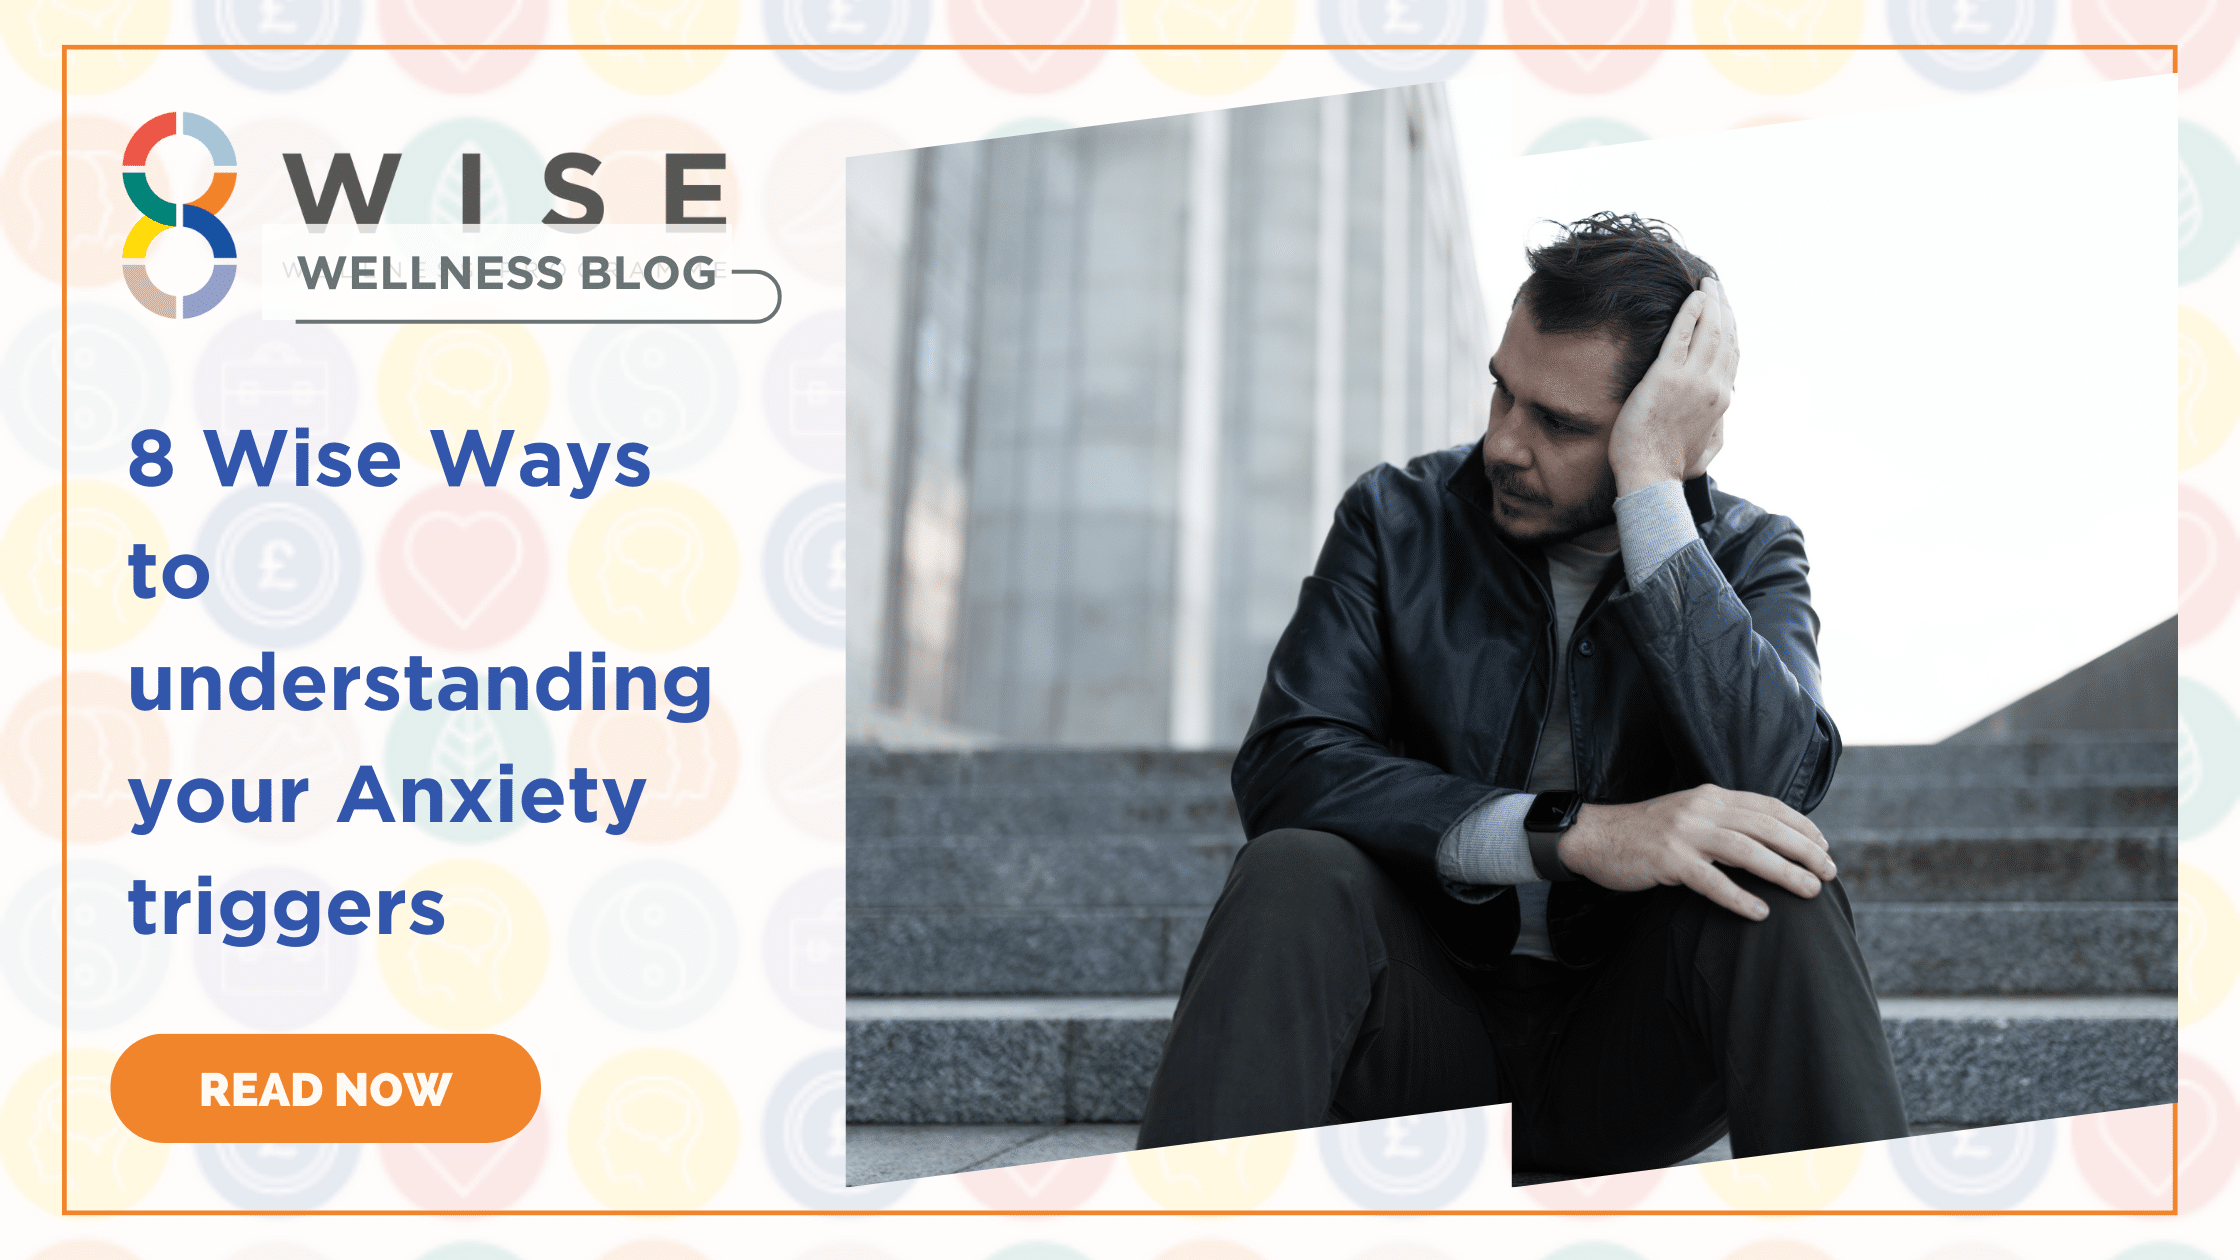 8 Wise Ways to understanding your Anxiety triggers